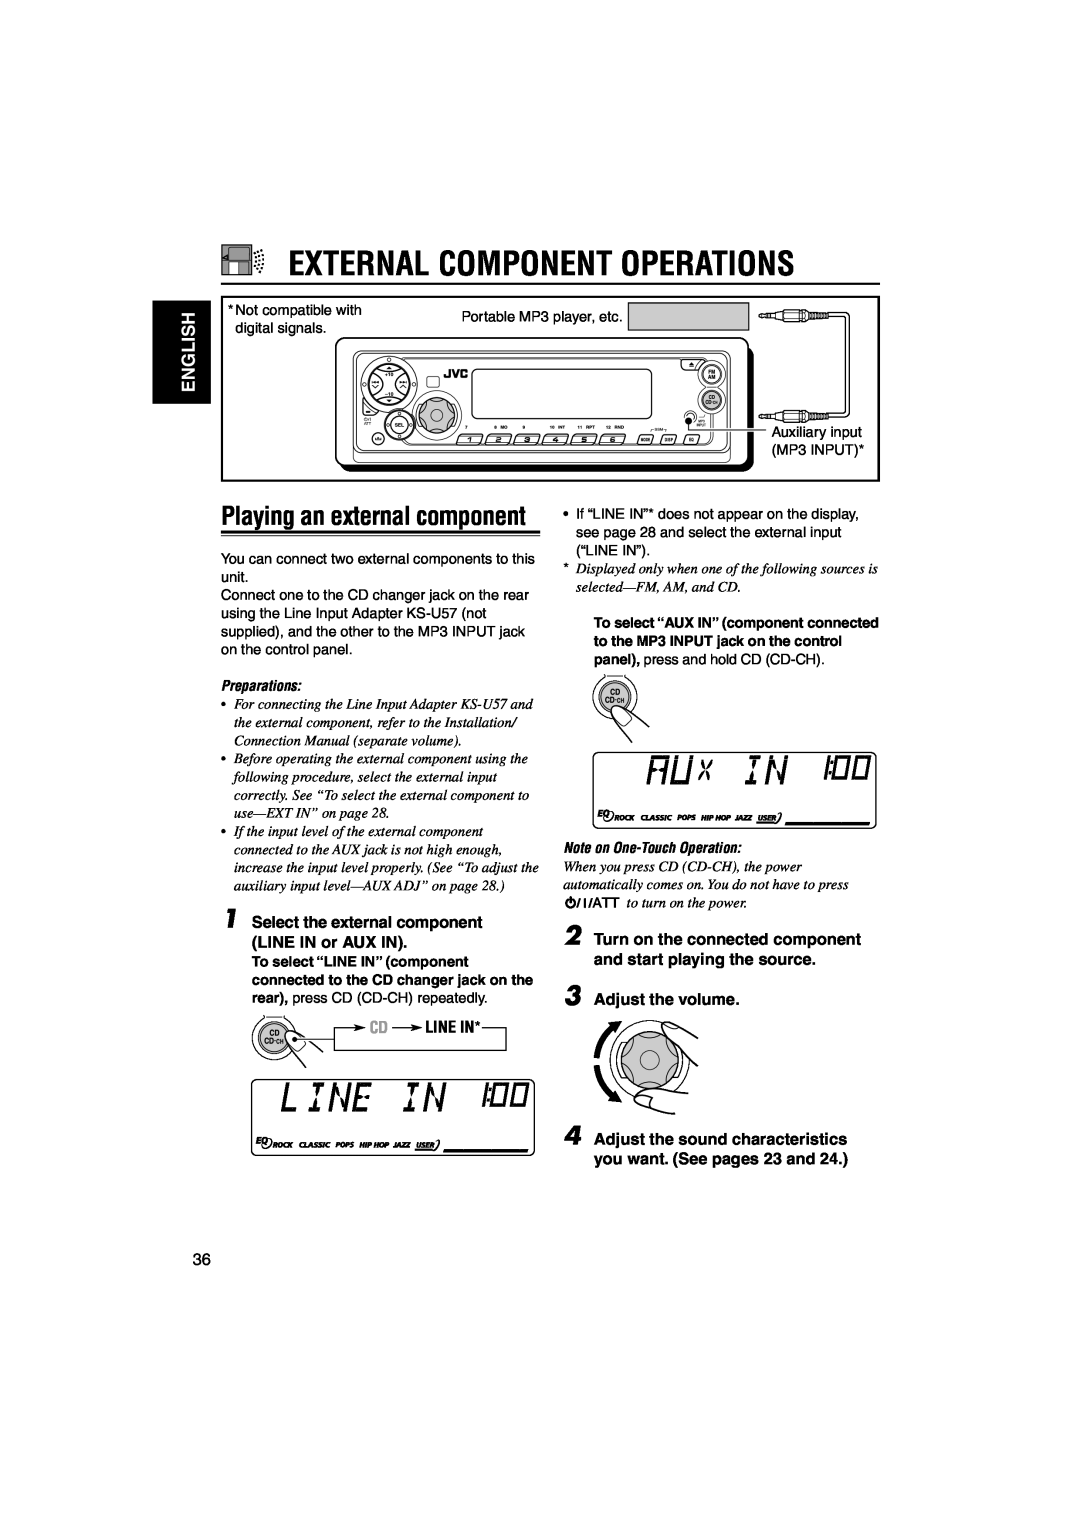 JVC KD-SX9350 manual External Component Operations, Playing an external component, English, Cd Line In, Adjust the volume 